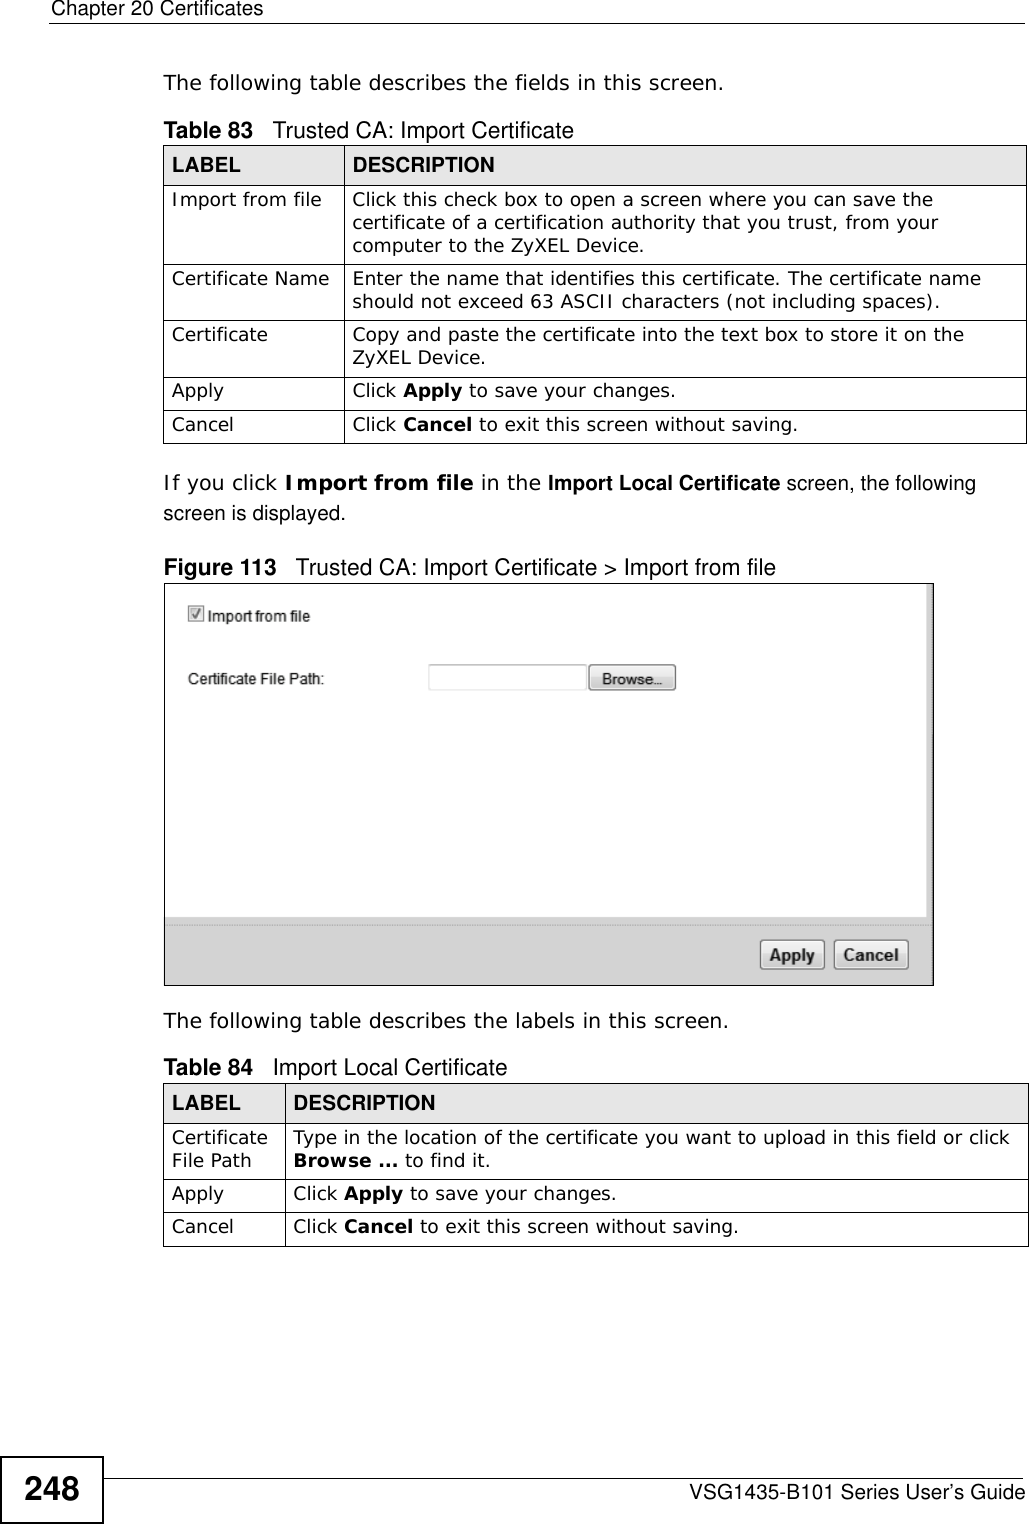 Chapter 20 CertificatesVSG1435-B101 Series User’s Guide248The following table describes the fields in this screen. If you click Import from file in the Import Local Certificate screen, the following screen is displayed.Figure 113   Trusted CA: Import Certificate &gt; Import from fileThe following table describes the labels in this screen. Table 83   Trusted CA: Import CertificateLABEL DESCRIPTIONImport from file Click this check box to open a screen where you can save the certificate of a certification authority that you trust, from your computer to the ZyXEL Device.Certificate Name Enter the name that identifies this certificate. The certificate name should not exceed 63 ASCII characters (not including spaces).Certificate Copy and paste the certificate into the text box to store it on the ZyXEL Device.Apply Click Apply to save your changes.Cancel Click Cancel to exit this screen without saving.Table 84   Import Local CertificateLABEL DESCRIPTIONCertificate File Path Type in the location of the certificate you want to upload in this field or click Browse ... to find it. Apply Click Apply to save your changes.Cancel Click Cancel to exit this screen without saving.